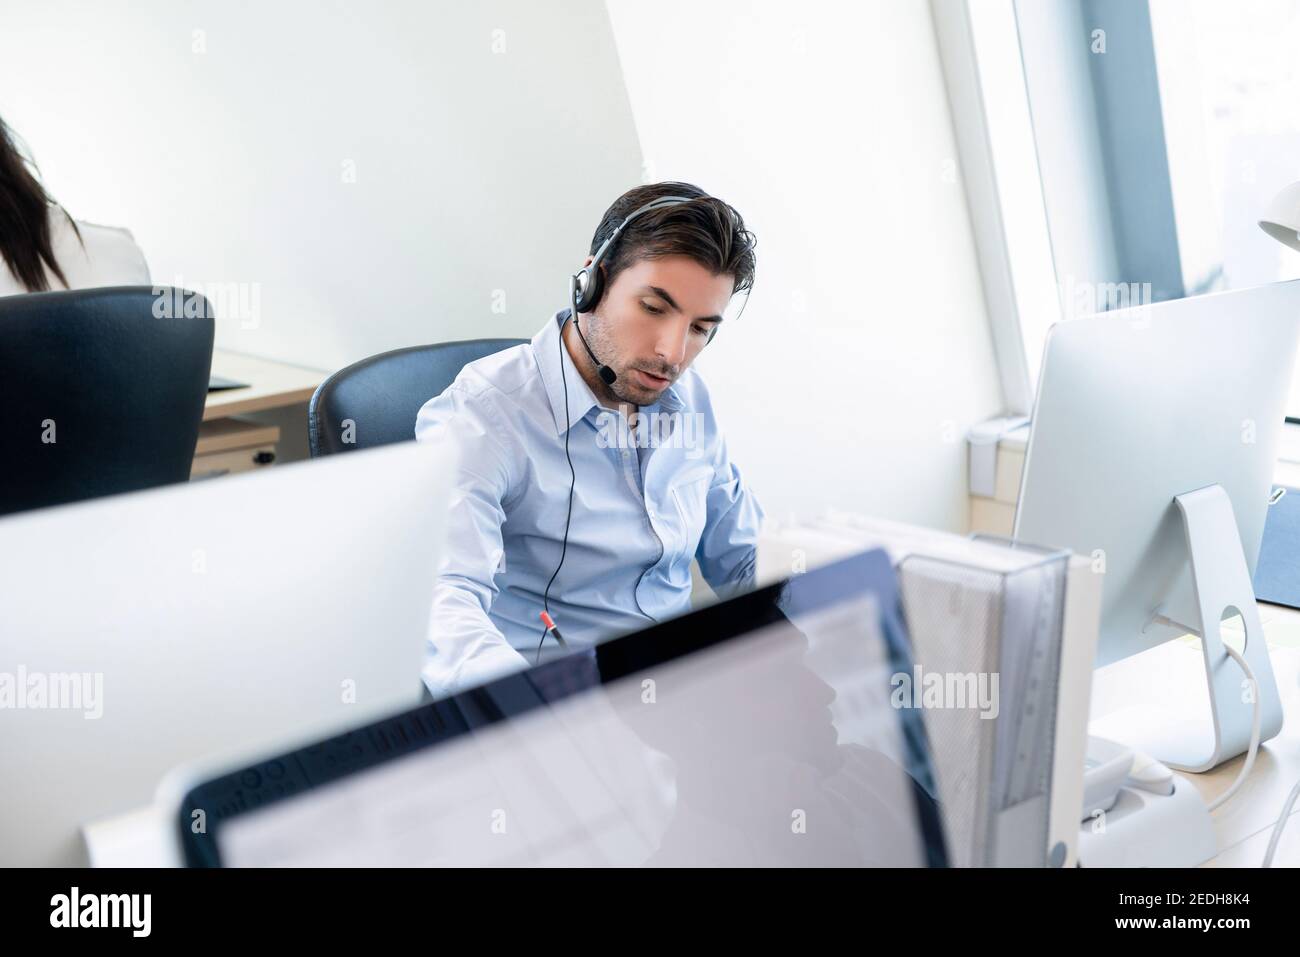 Hispanic businessman working in call center office as a telemarketing customer service agent Stock Photo